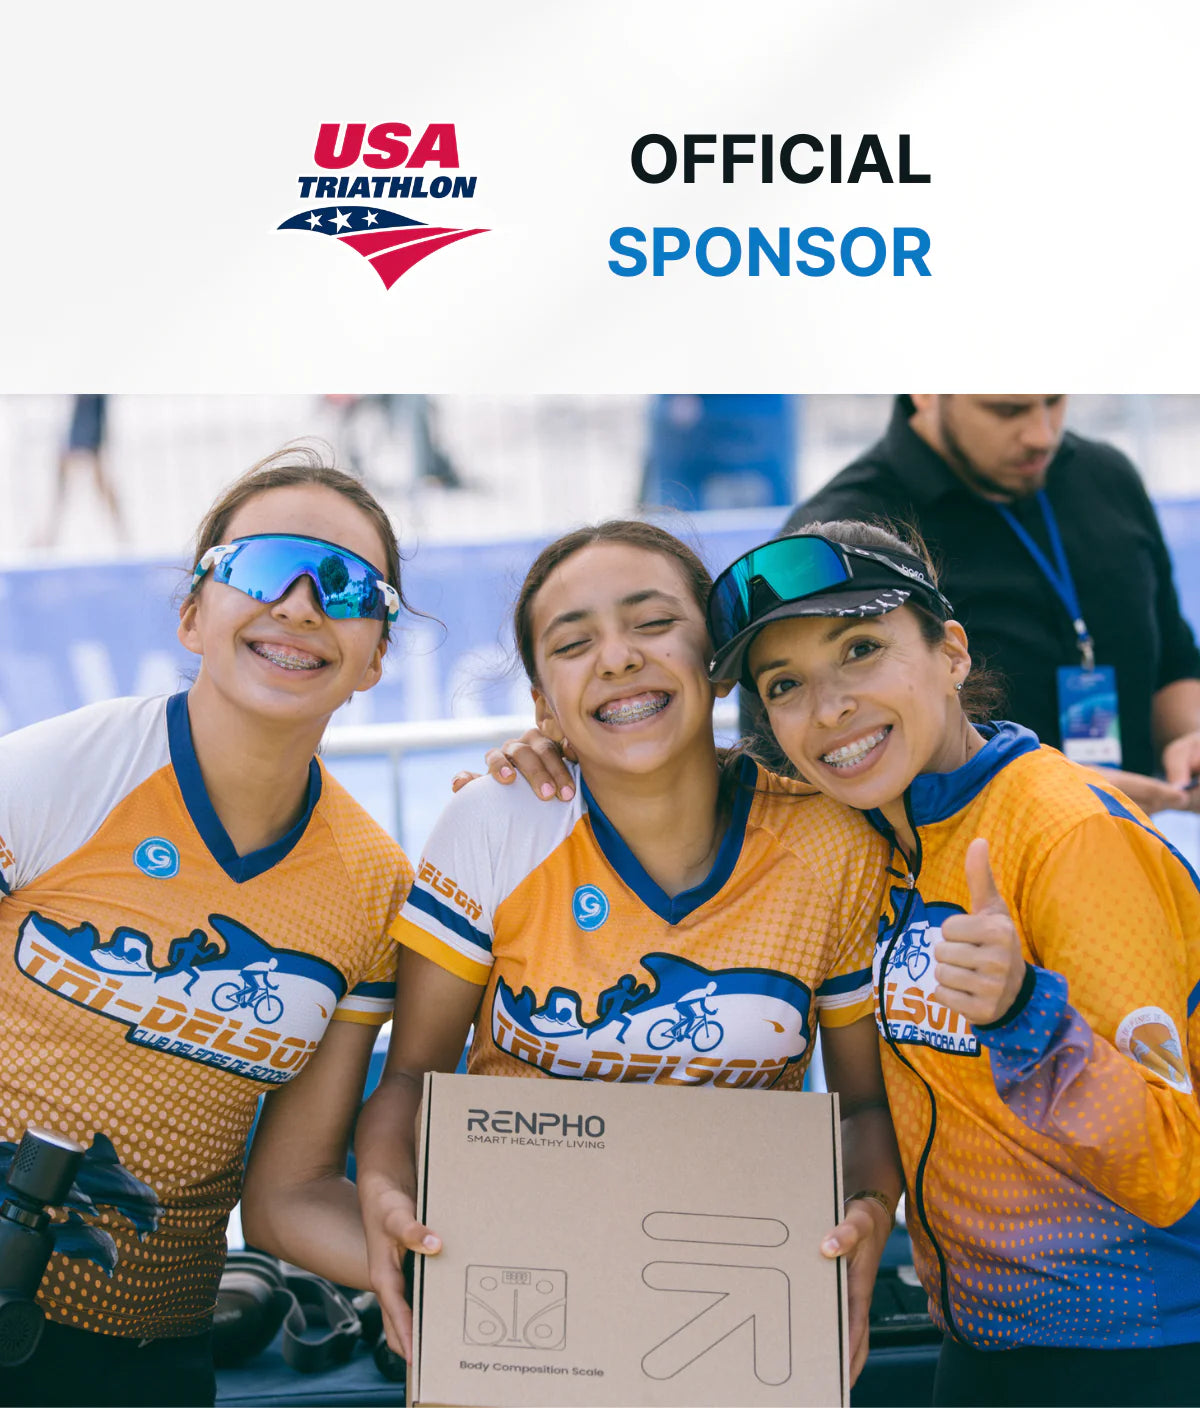 Three joyful female athletes in yellow and blue cycling jerseys, branded "USA Triathlon," pose together with their arms around each other, holding a Smart Body Scale labeled "Elis Aspire" by Renpho EU. "Official Sponsor